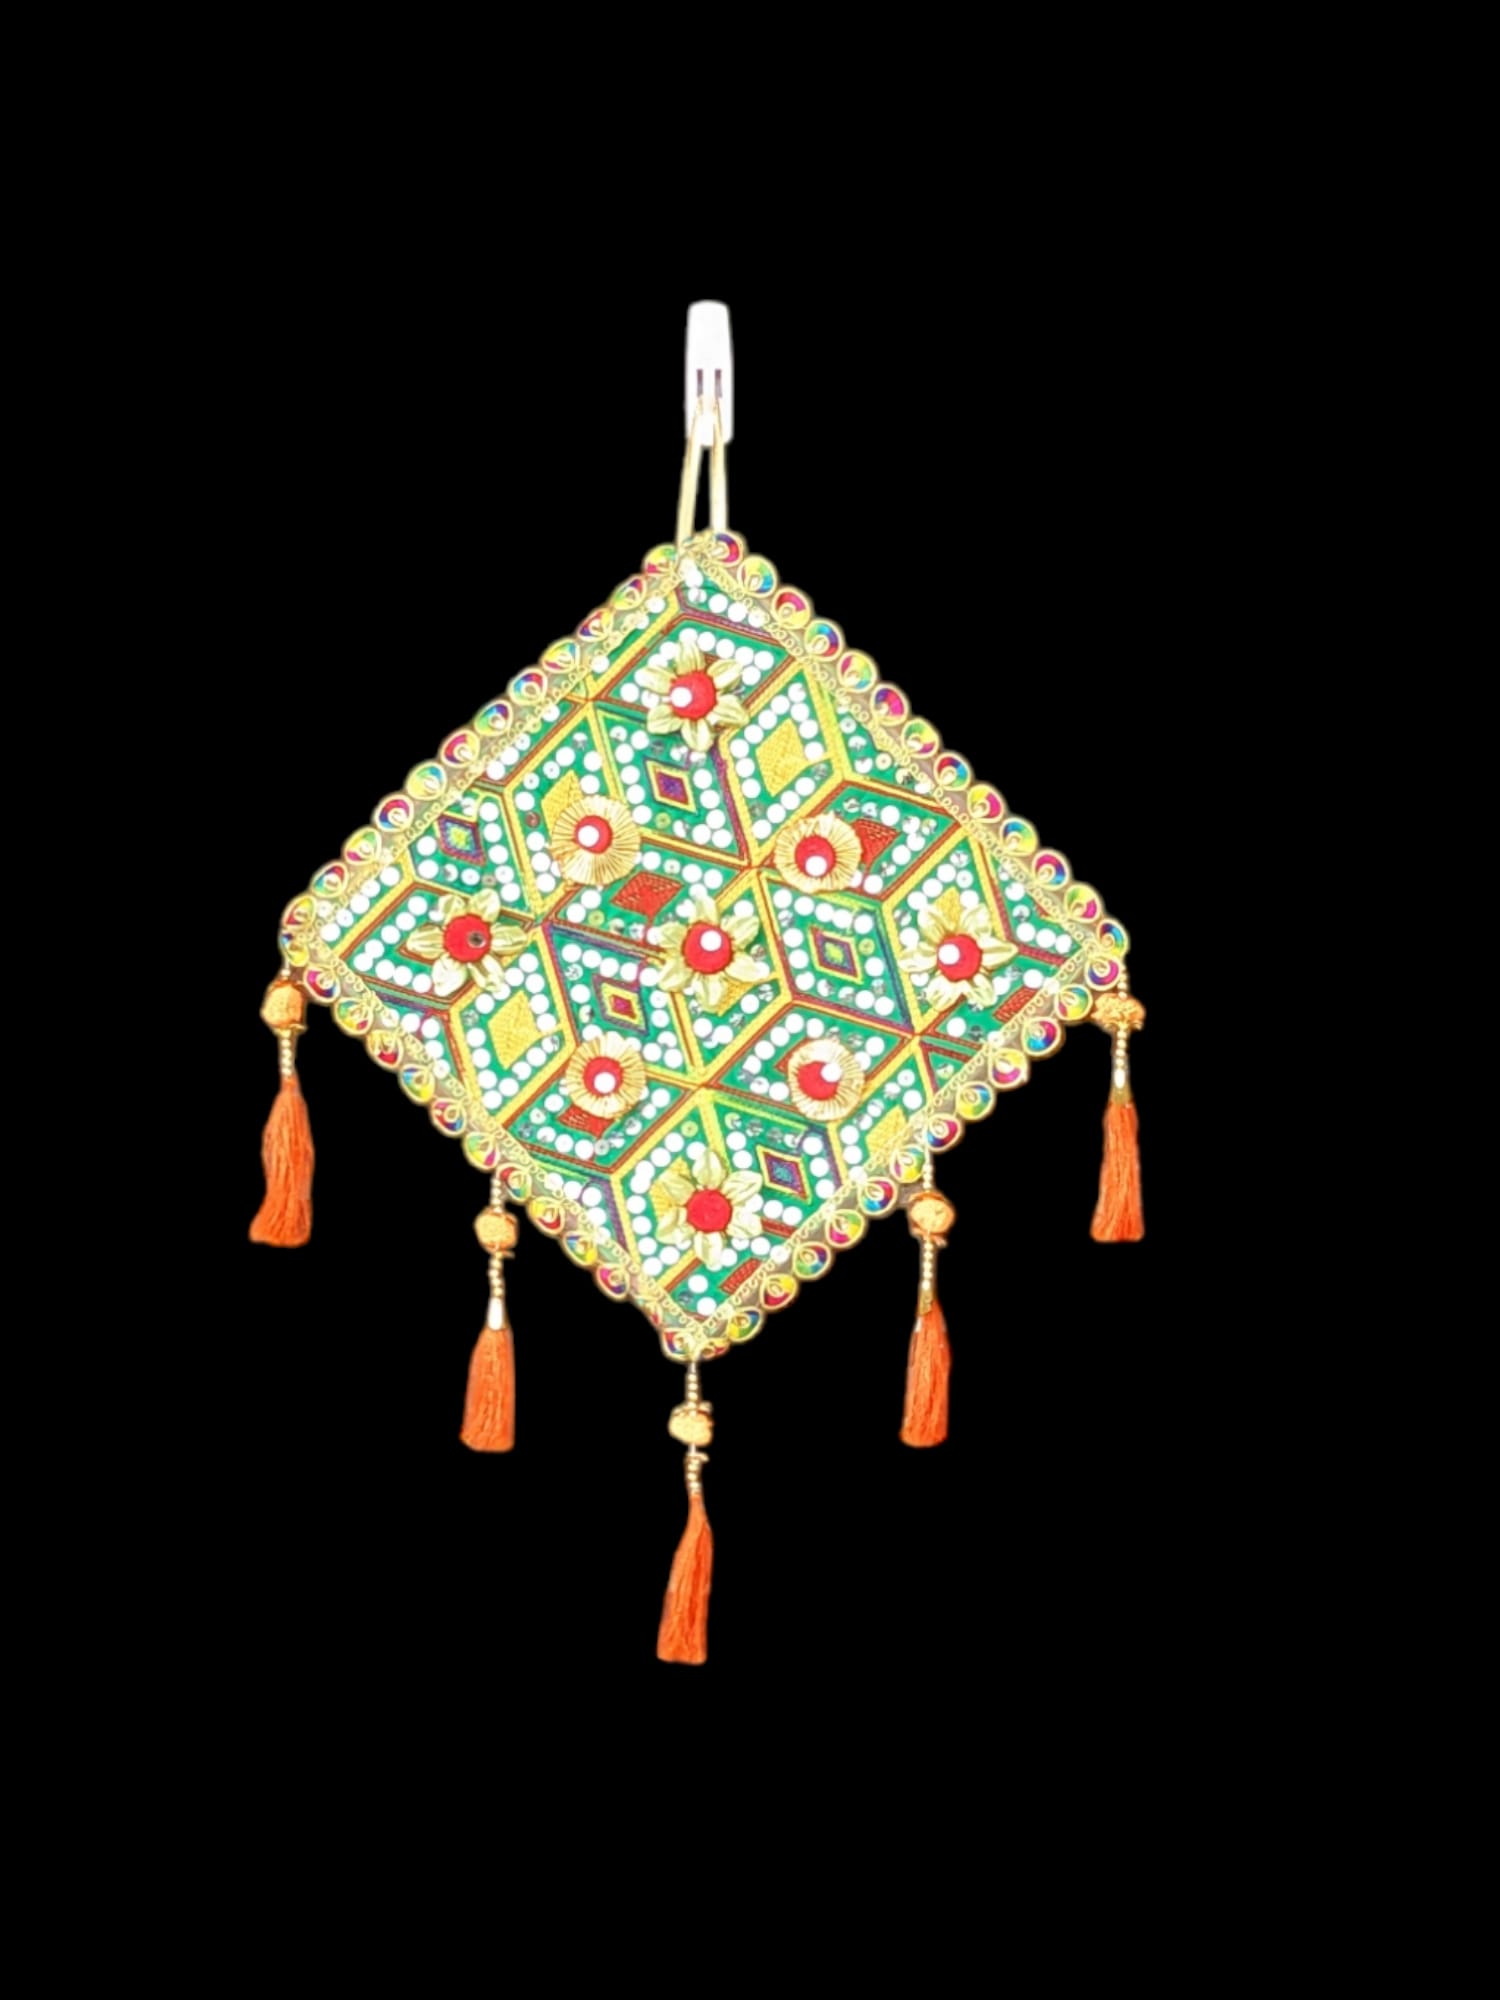 Image of handcrafted kite shaped wall hanging for home decor and Diwali decorations in Canada and the US.